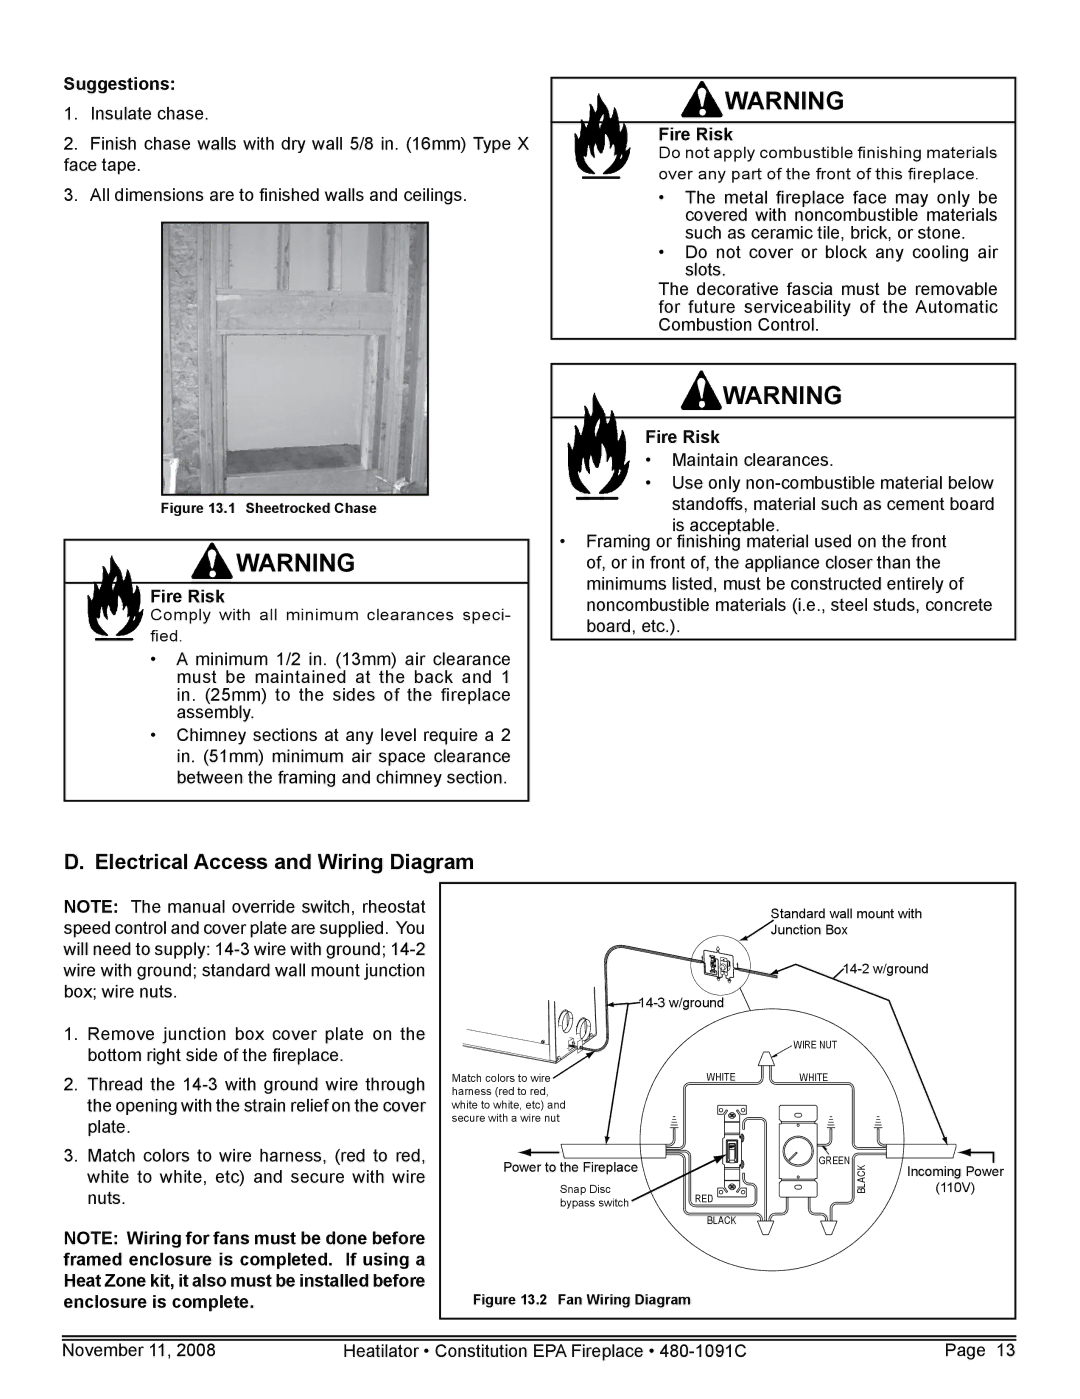 Hearth and Home Technologies C-40 warranty Electrical Access and Wiring Diagram, Suggestions 